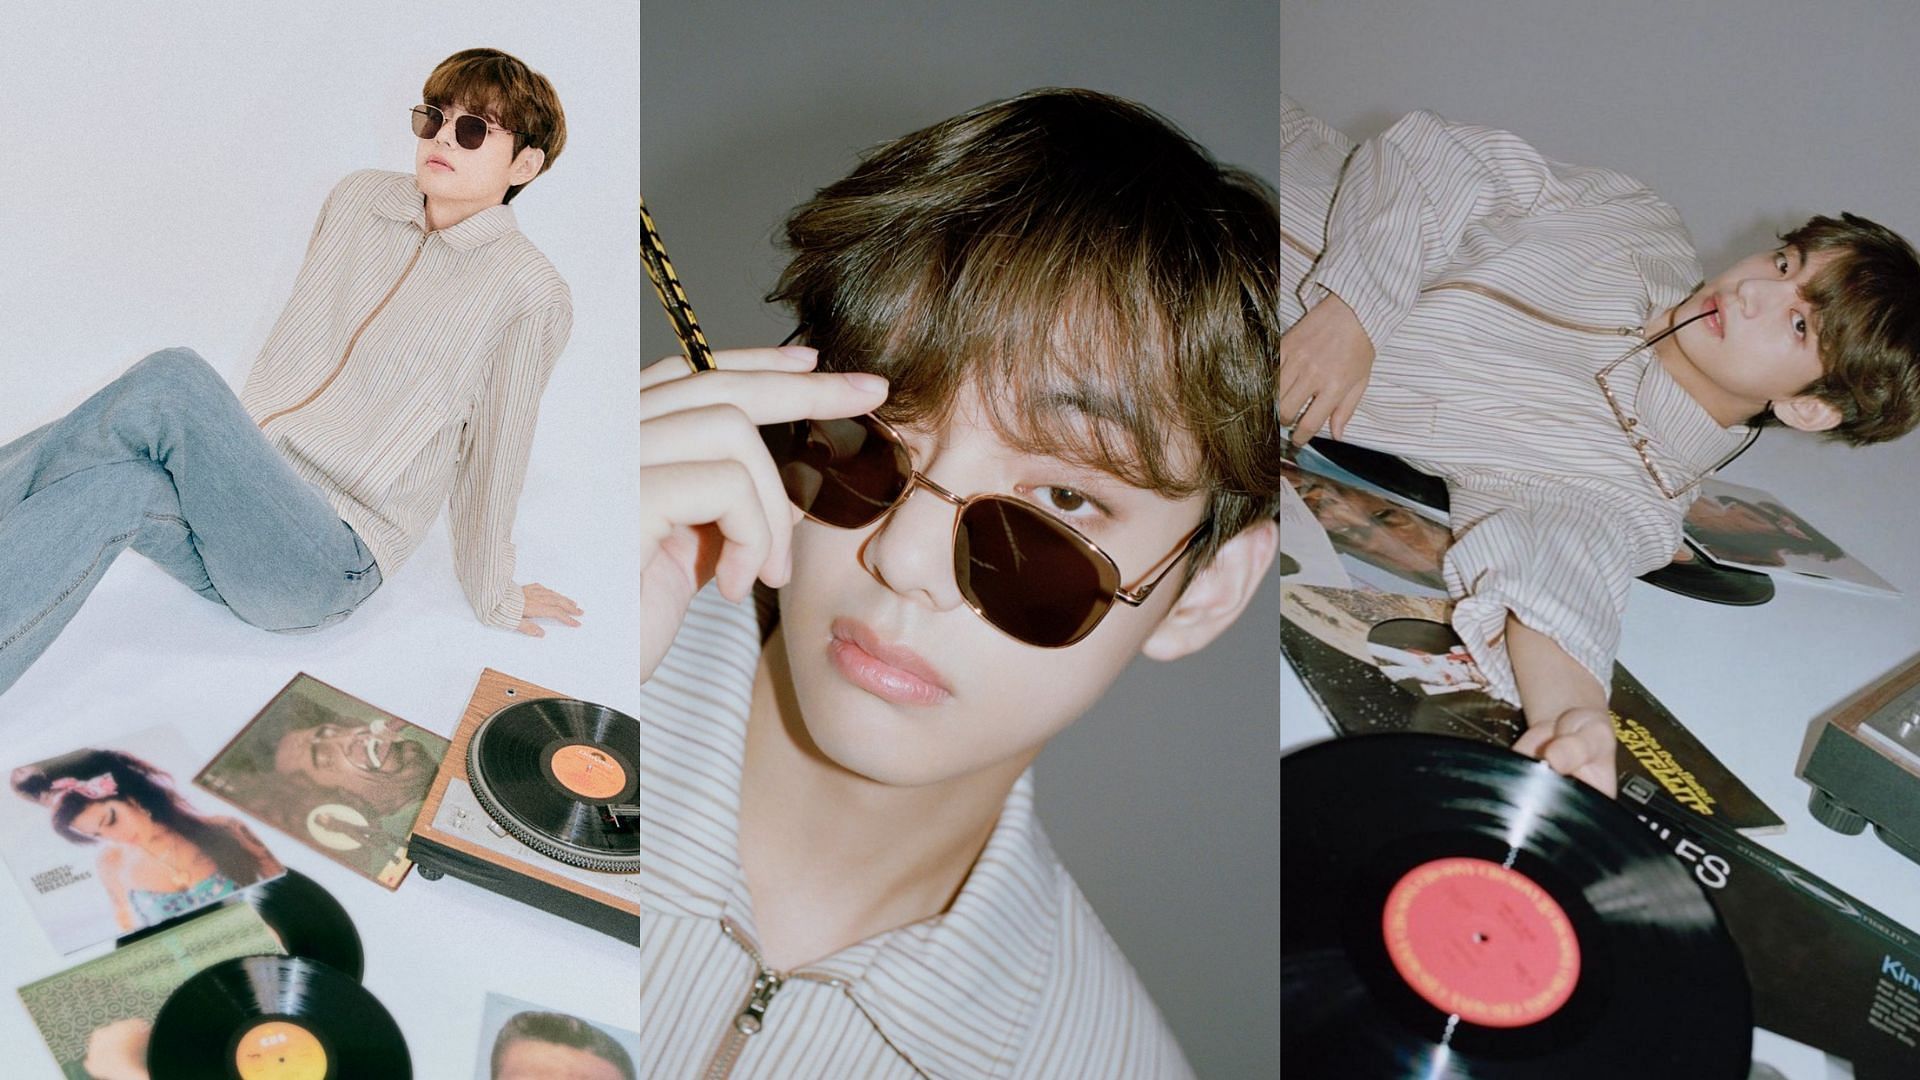 Kim Tae-hyung showing off his artistic side for his Weverse magazine interview (Images via Weverse)